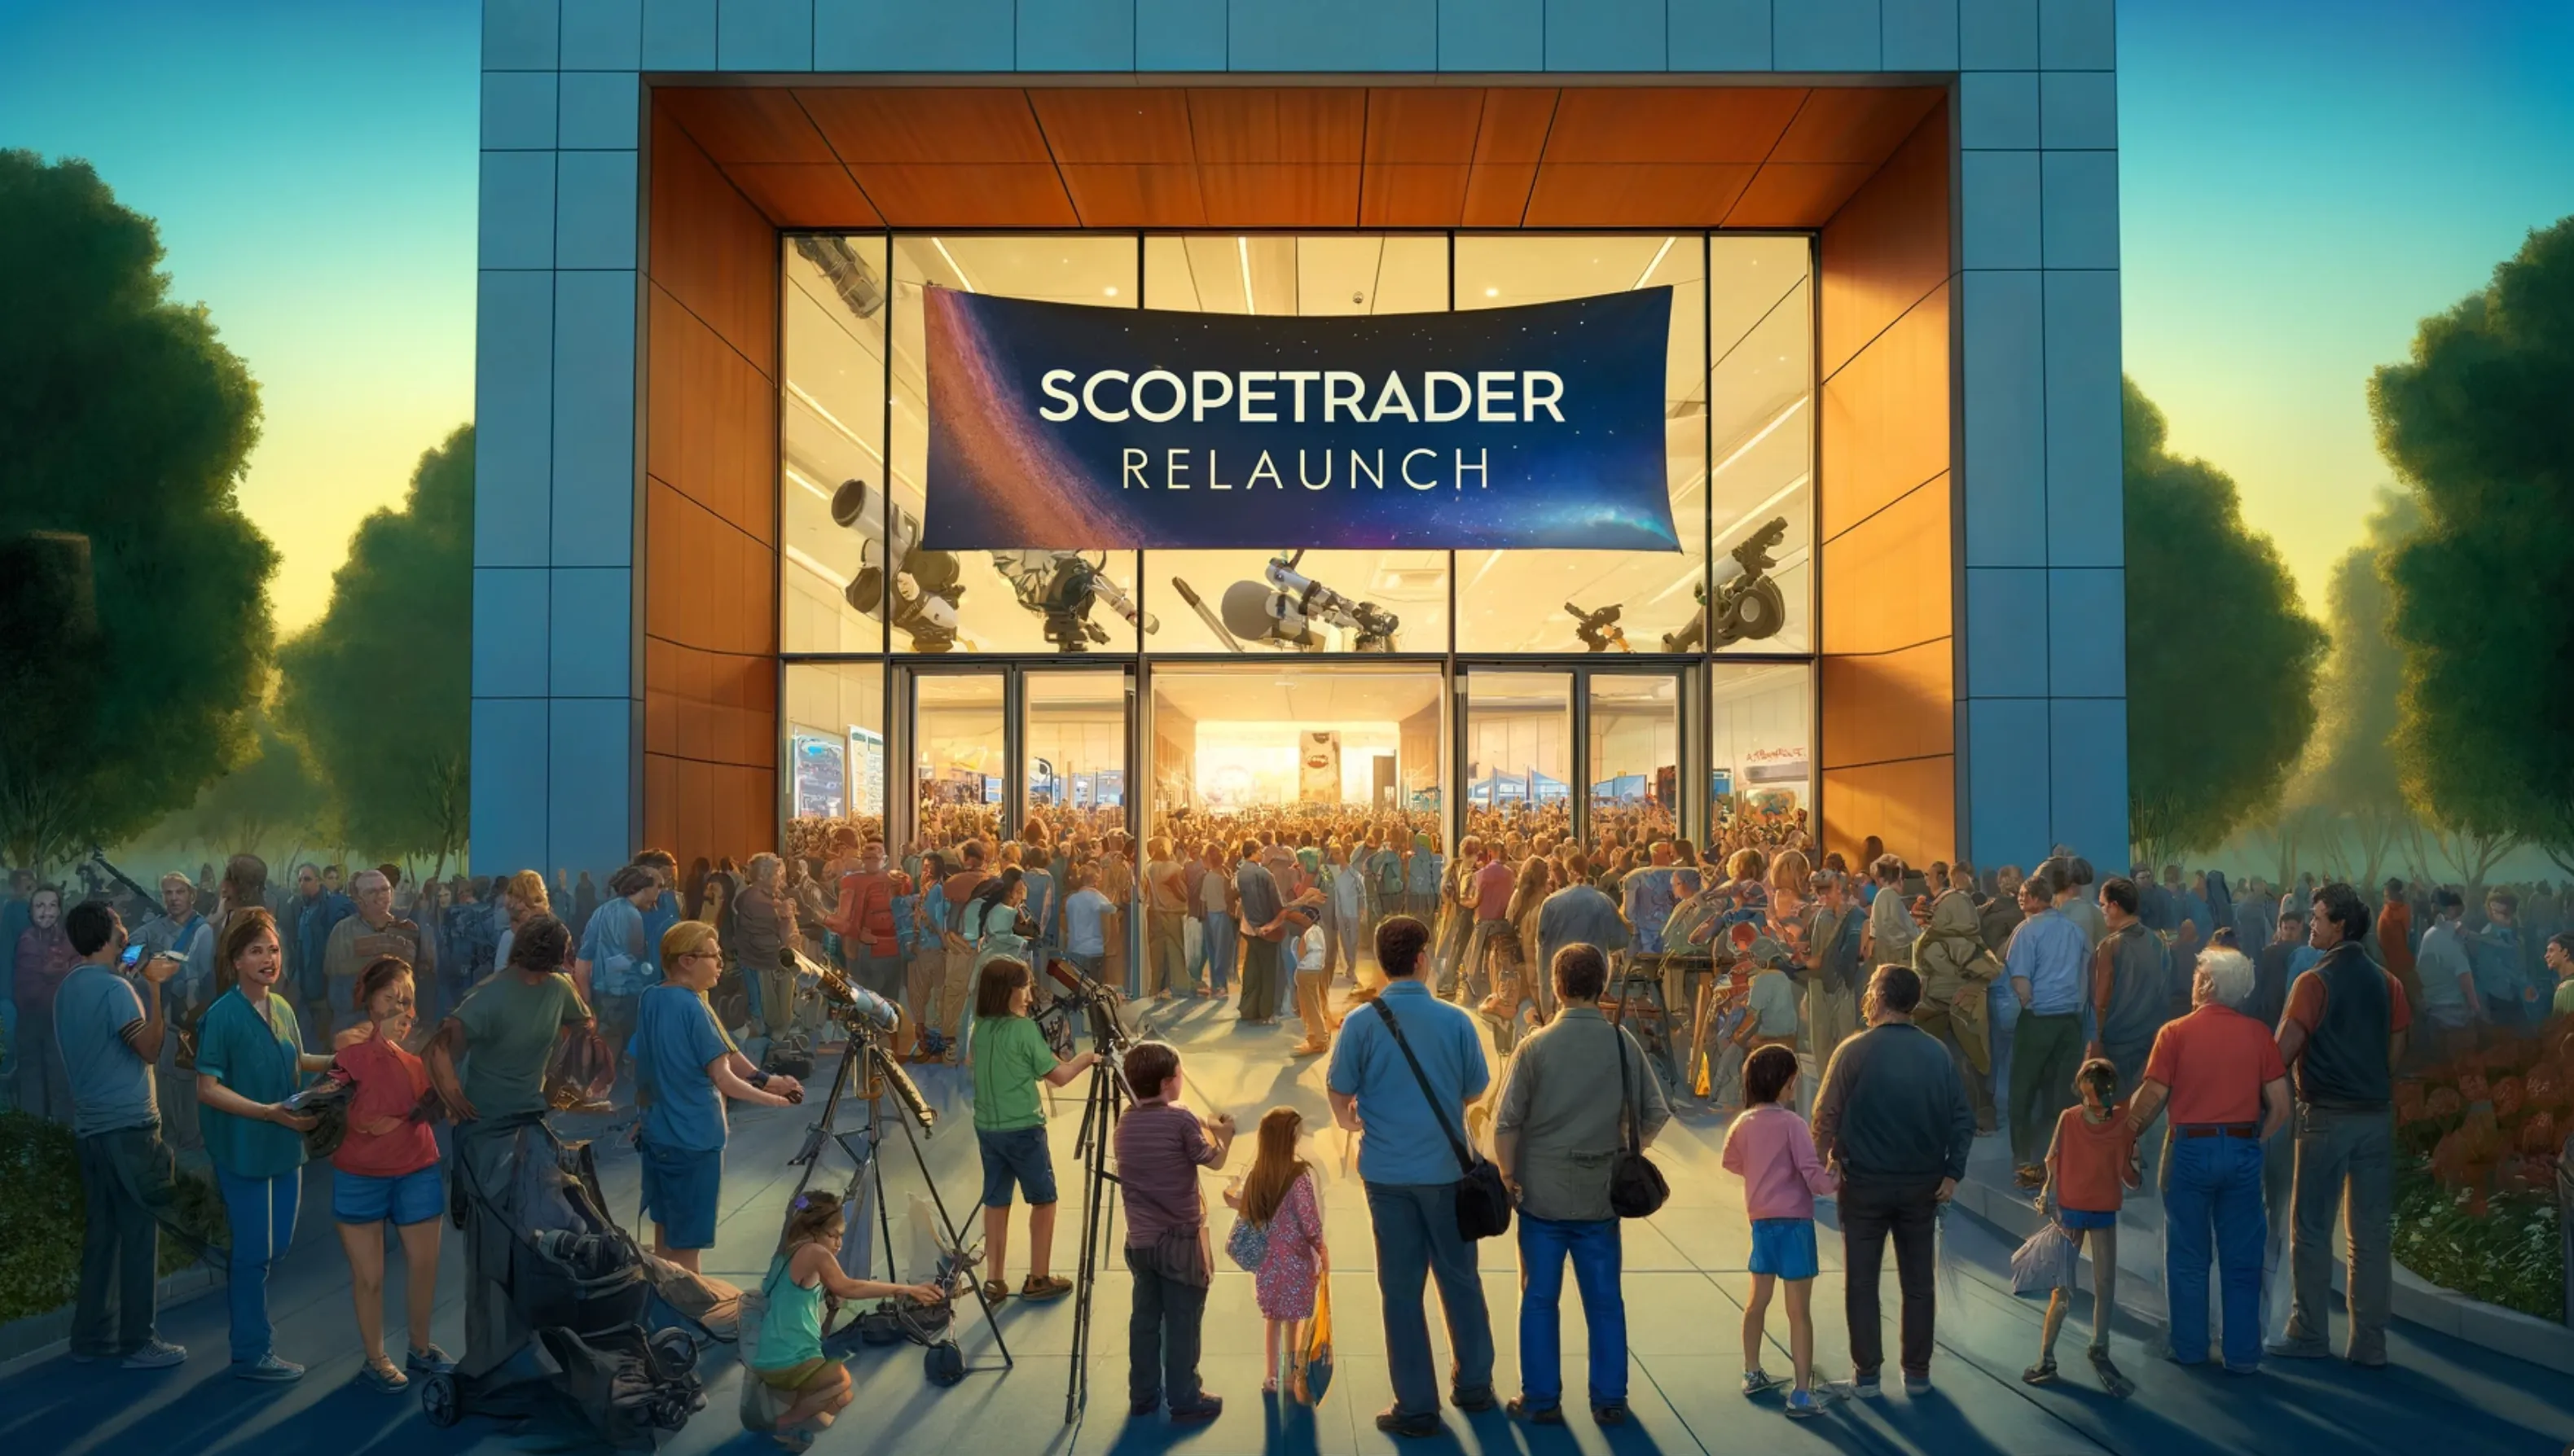 Astronomy classifieds and telescope equipment news ScopeTrader re-launches